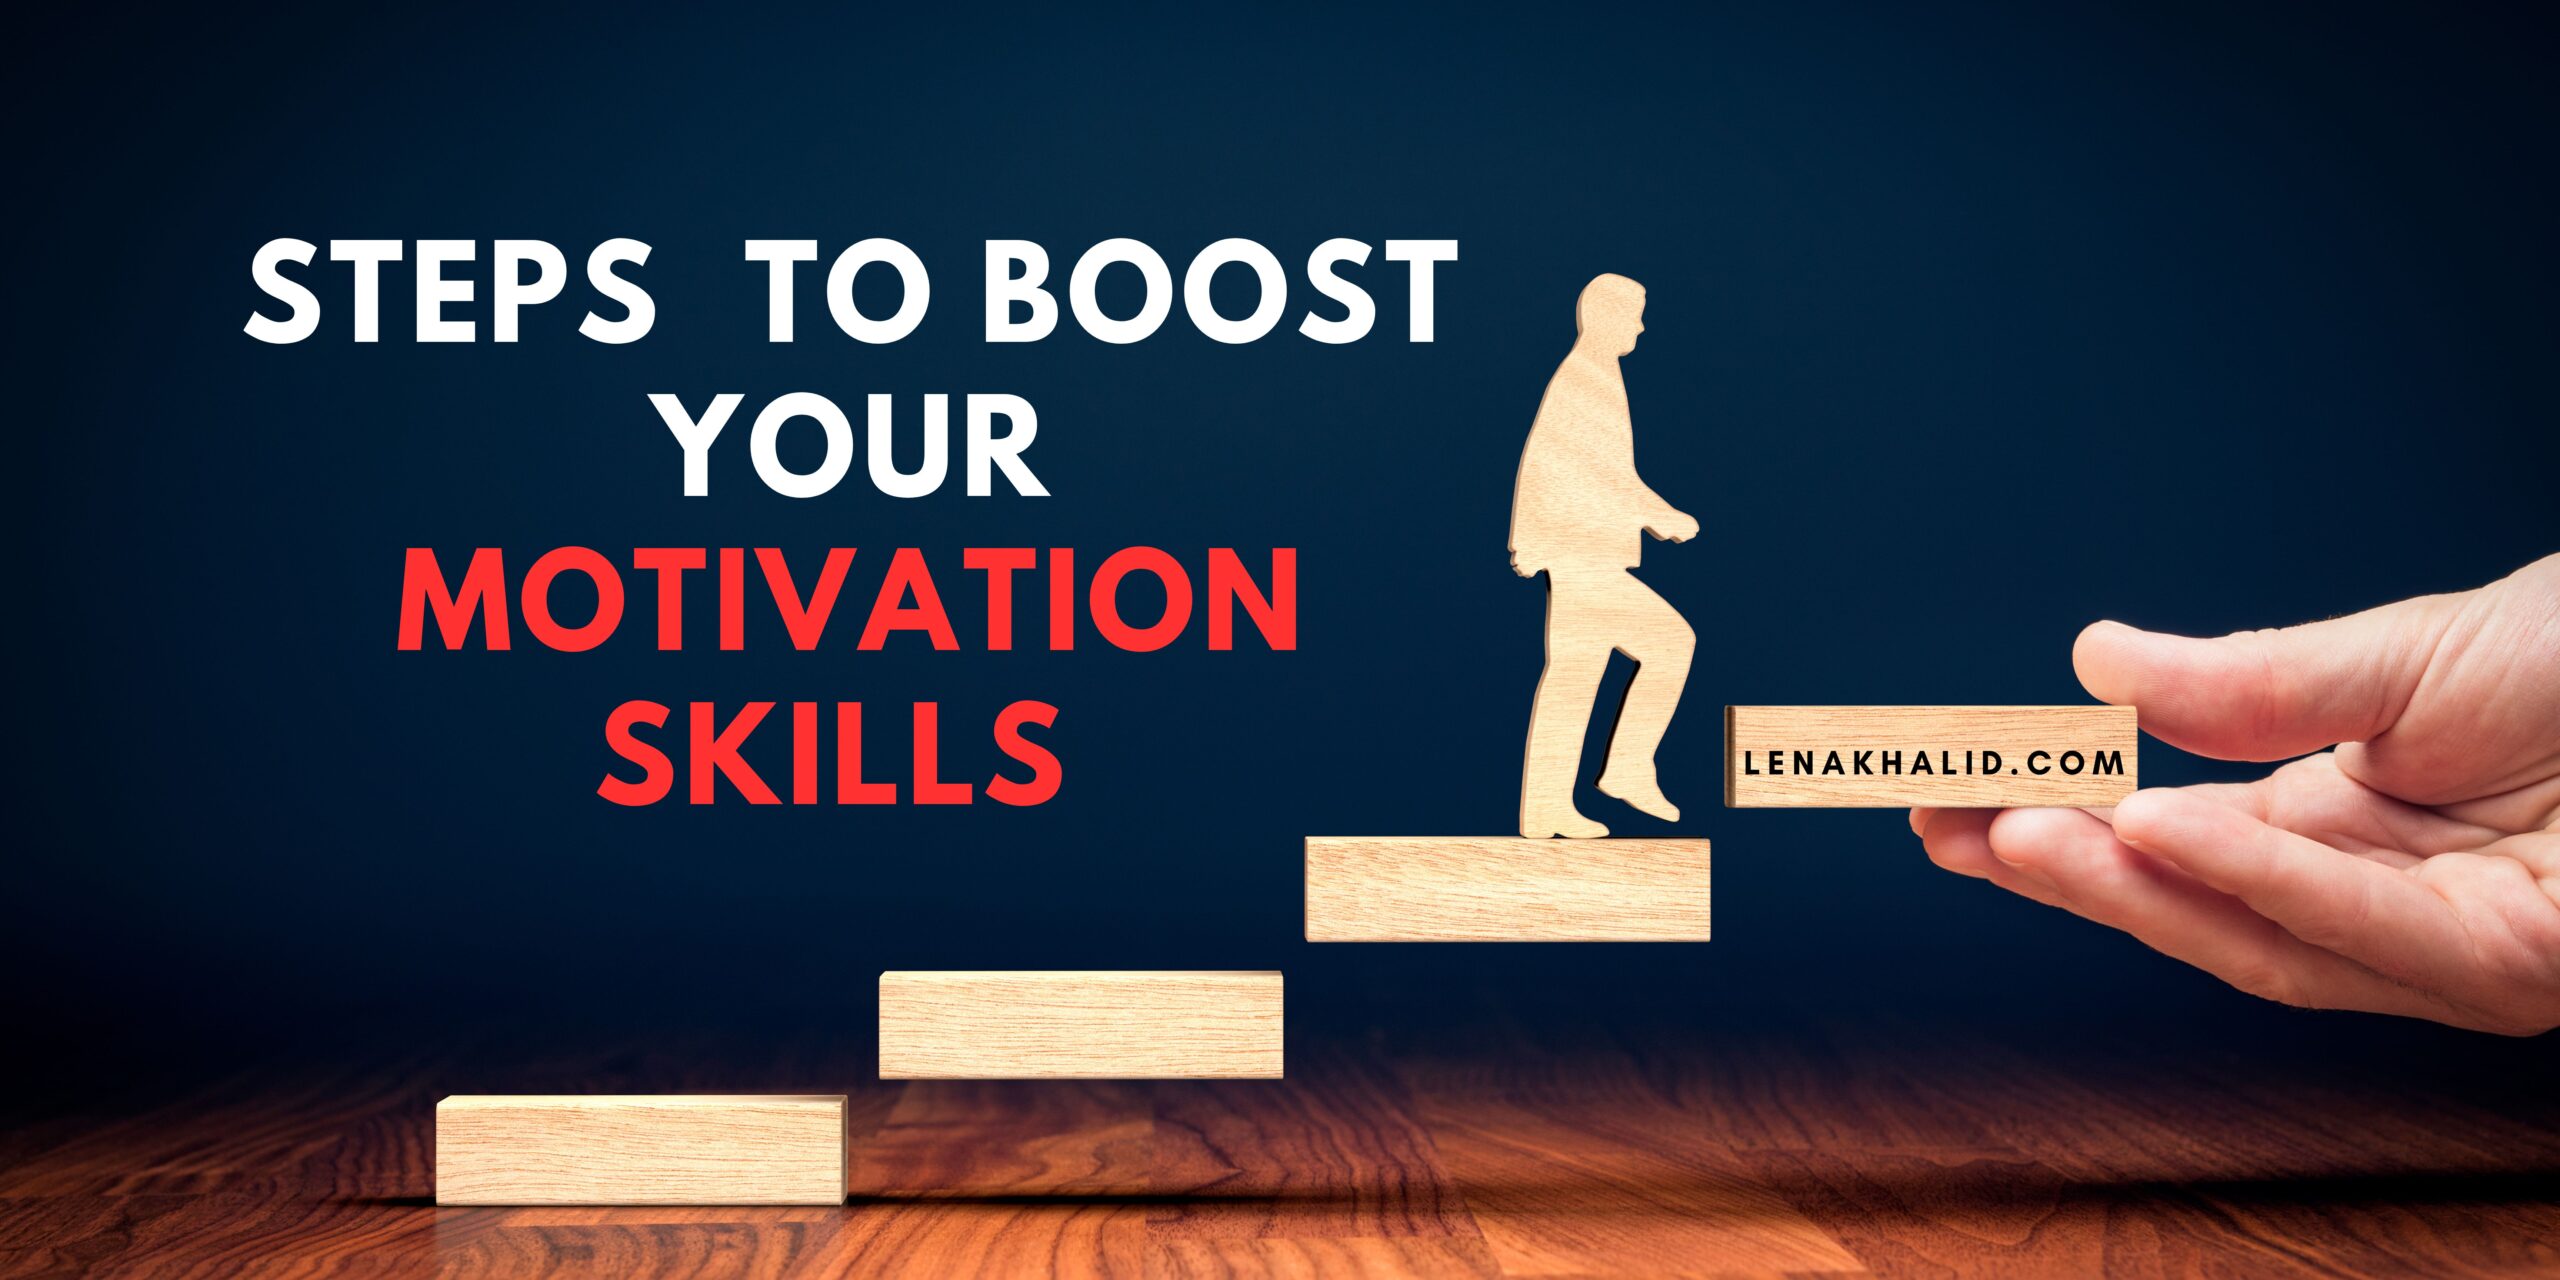 Steps To Boost Your Motivation Skills